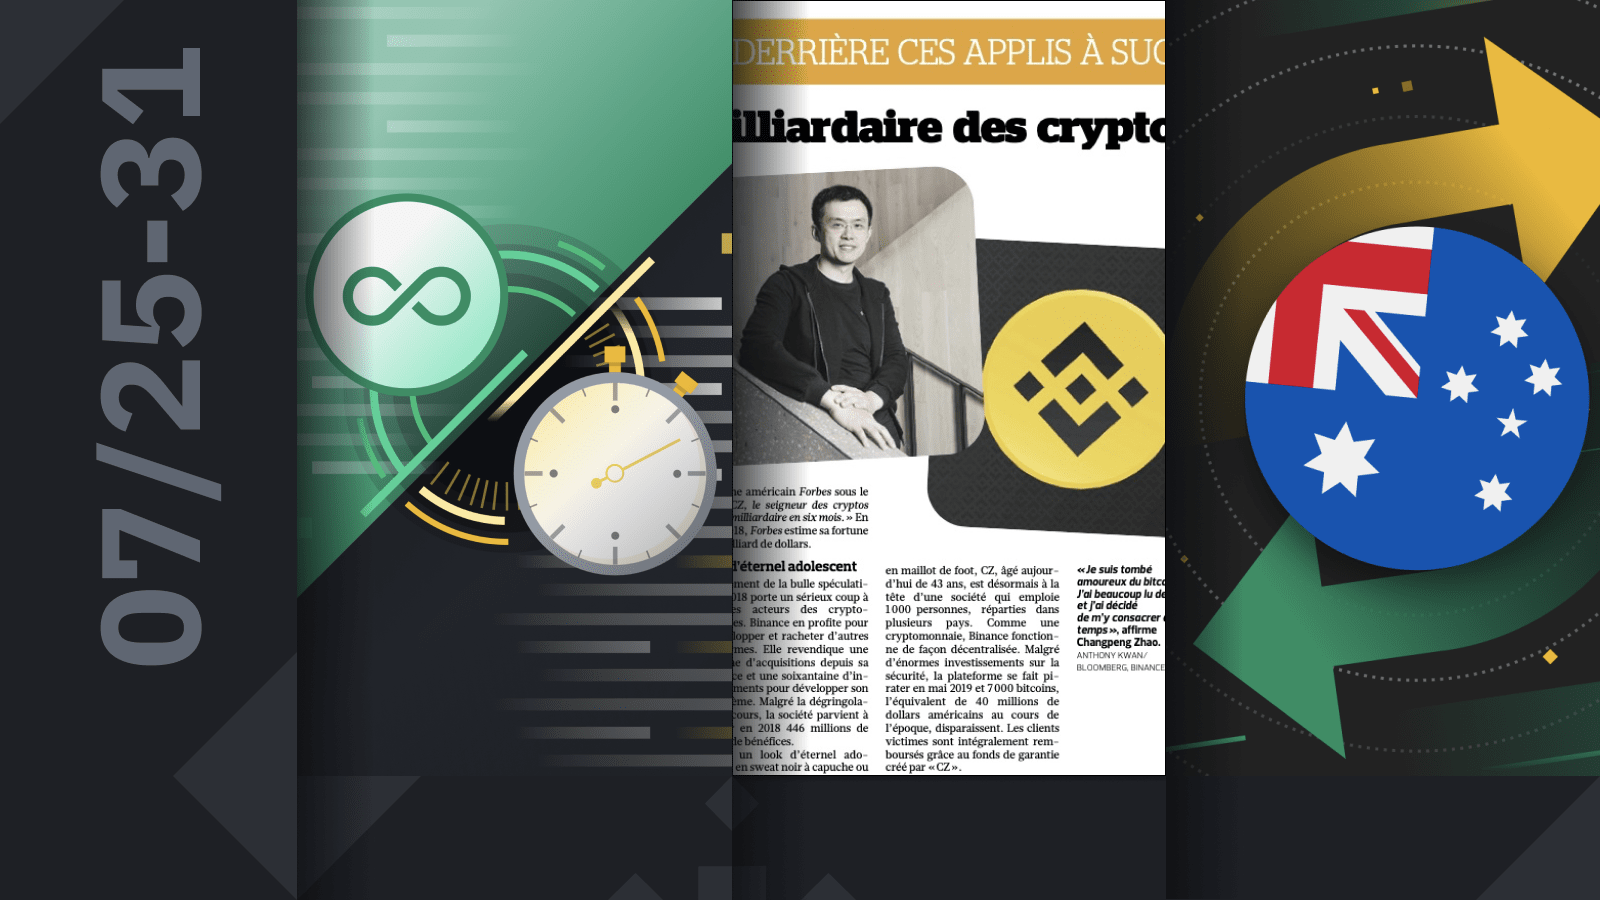 Picture of binance CEO on a newspaper page